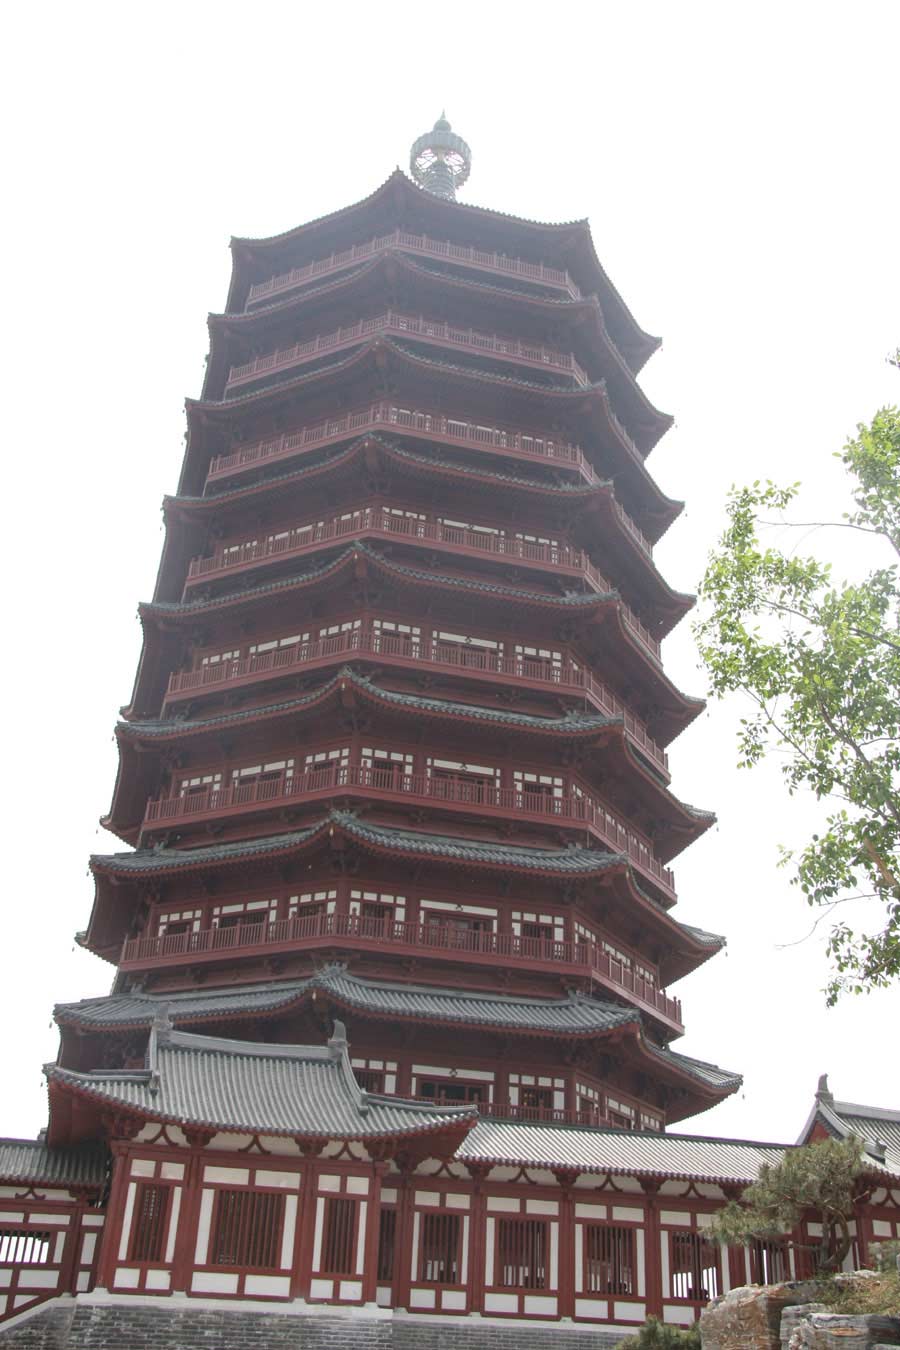 A close-up view of the Yongding Pagoda that overlooks the Ninth China (Beijing) International Garden Expo in western Beijing. The expo covers an area of 513 hectares, including 267-hecare public exhibition area and 246-hectare Garden Expo Lake. The event will officially kick off on May 18, 2013 and last for six months. (CRIENGLISH.com/Luo Dan)